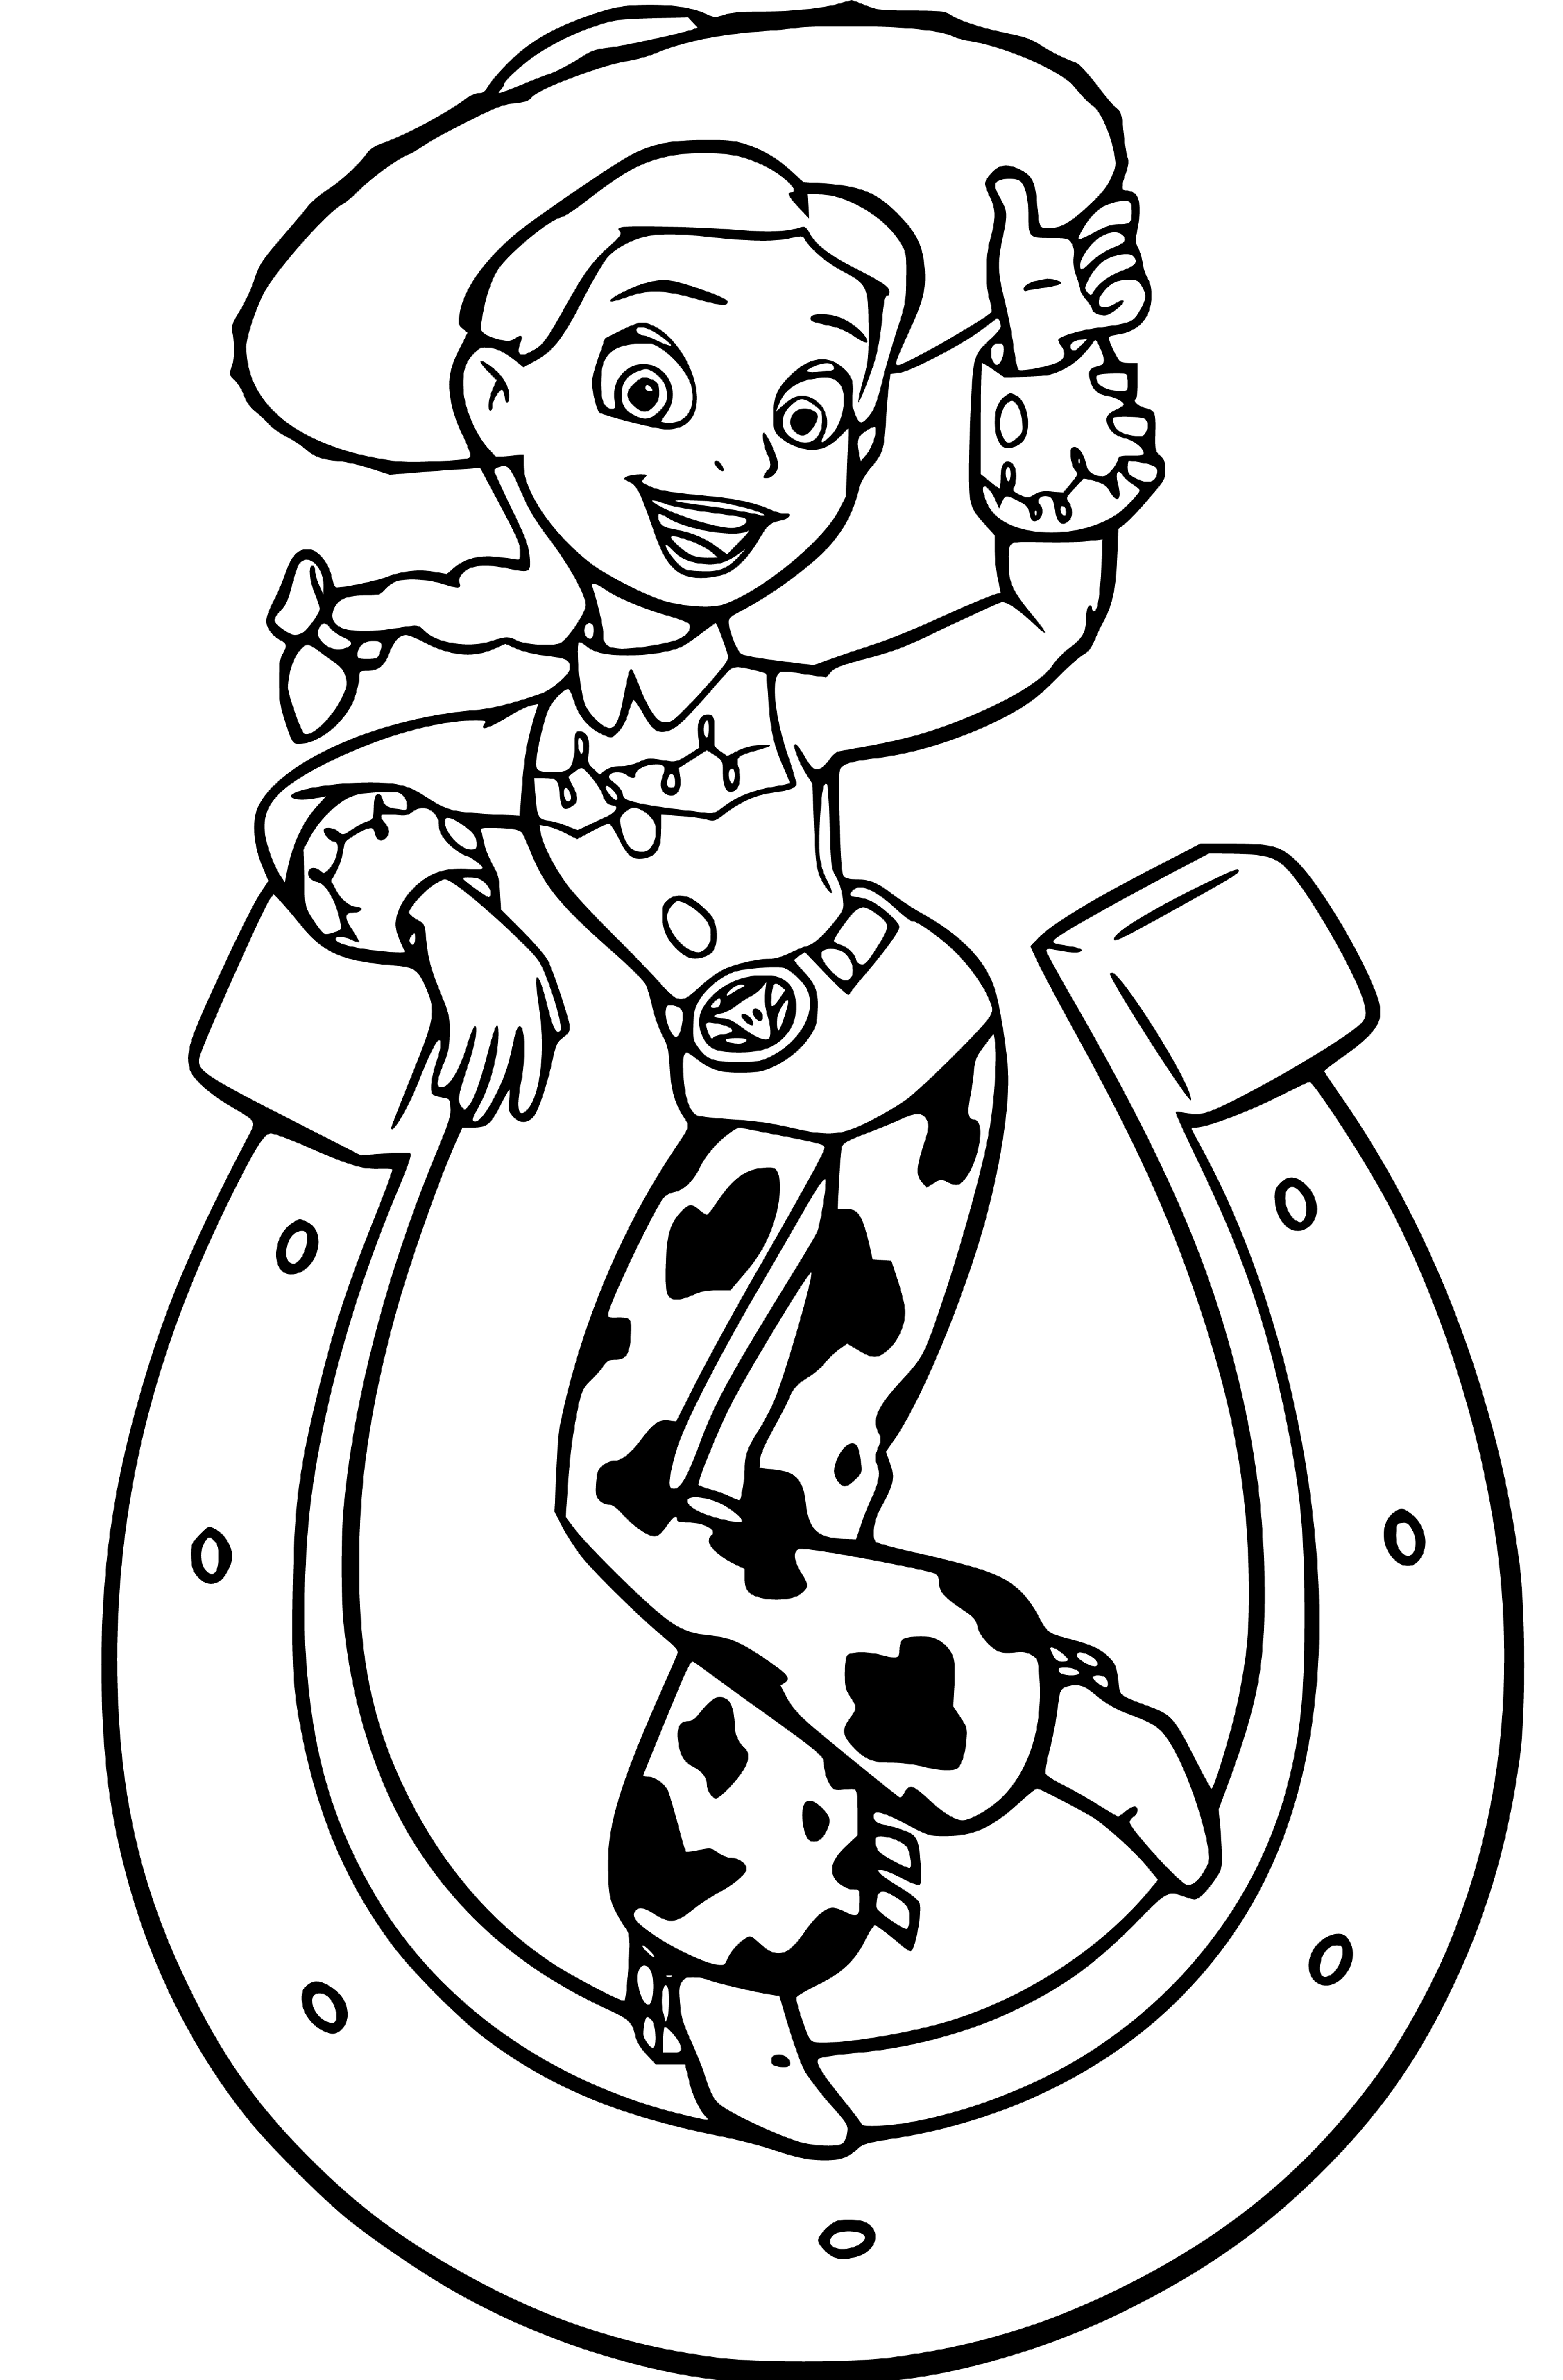 Printable Jessie the Cowgirl Coloring Page for kids.